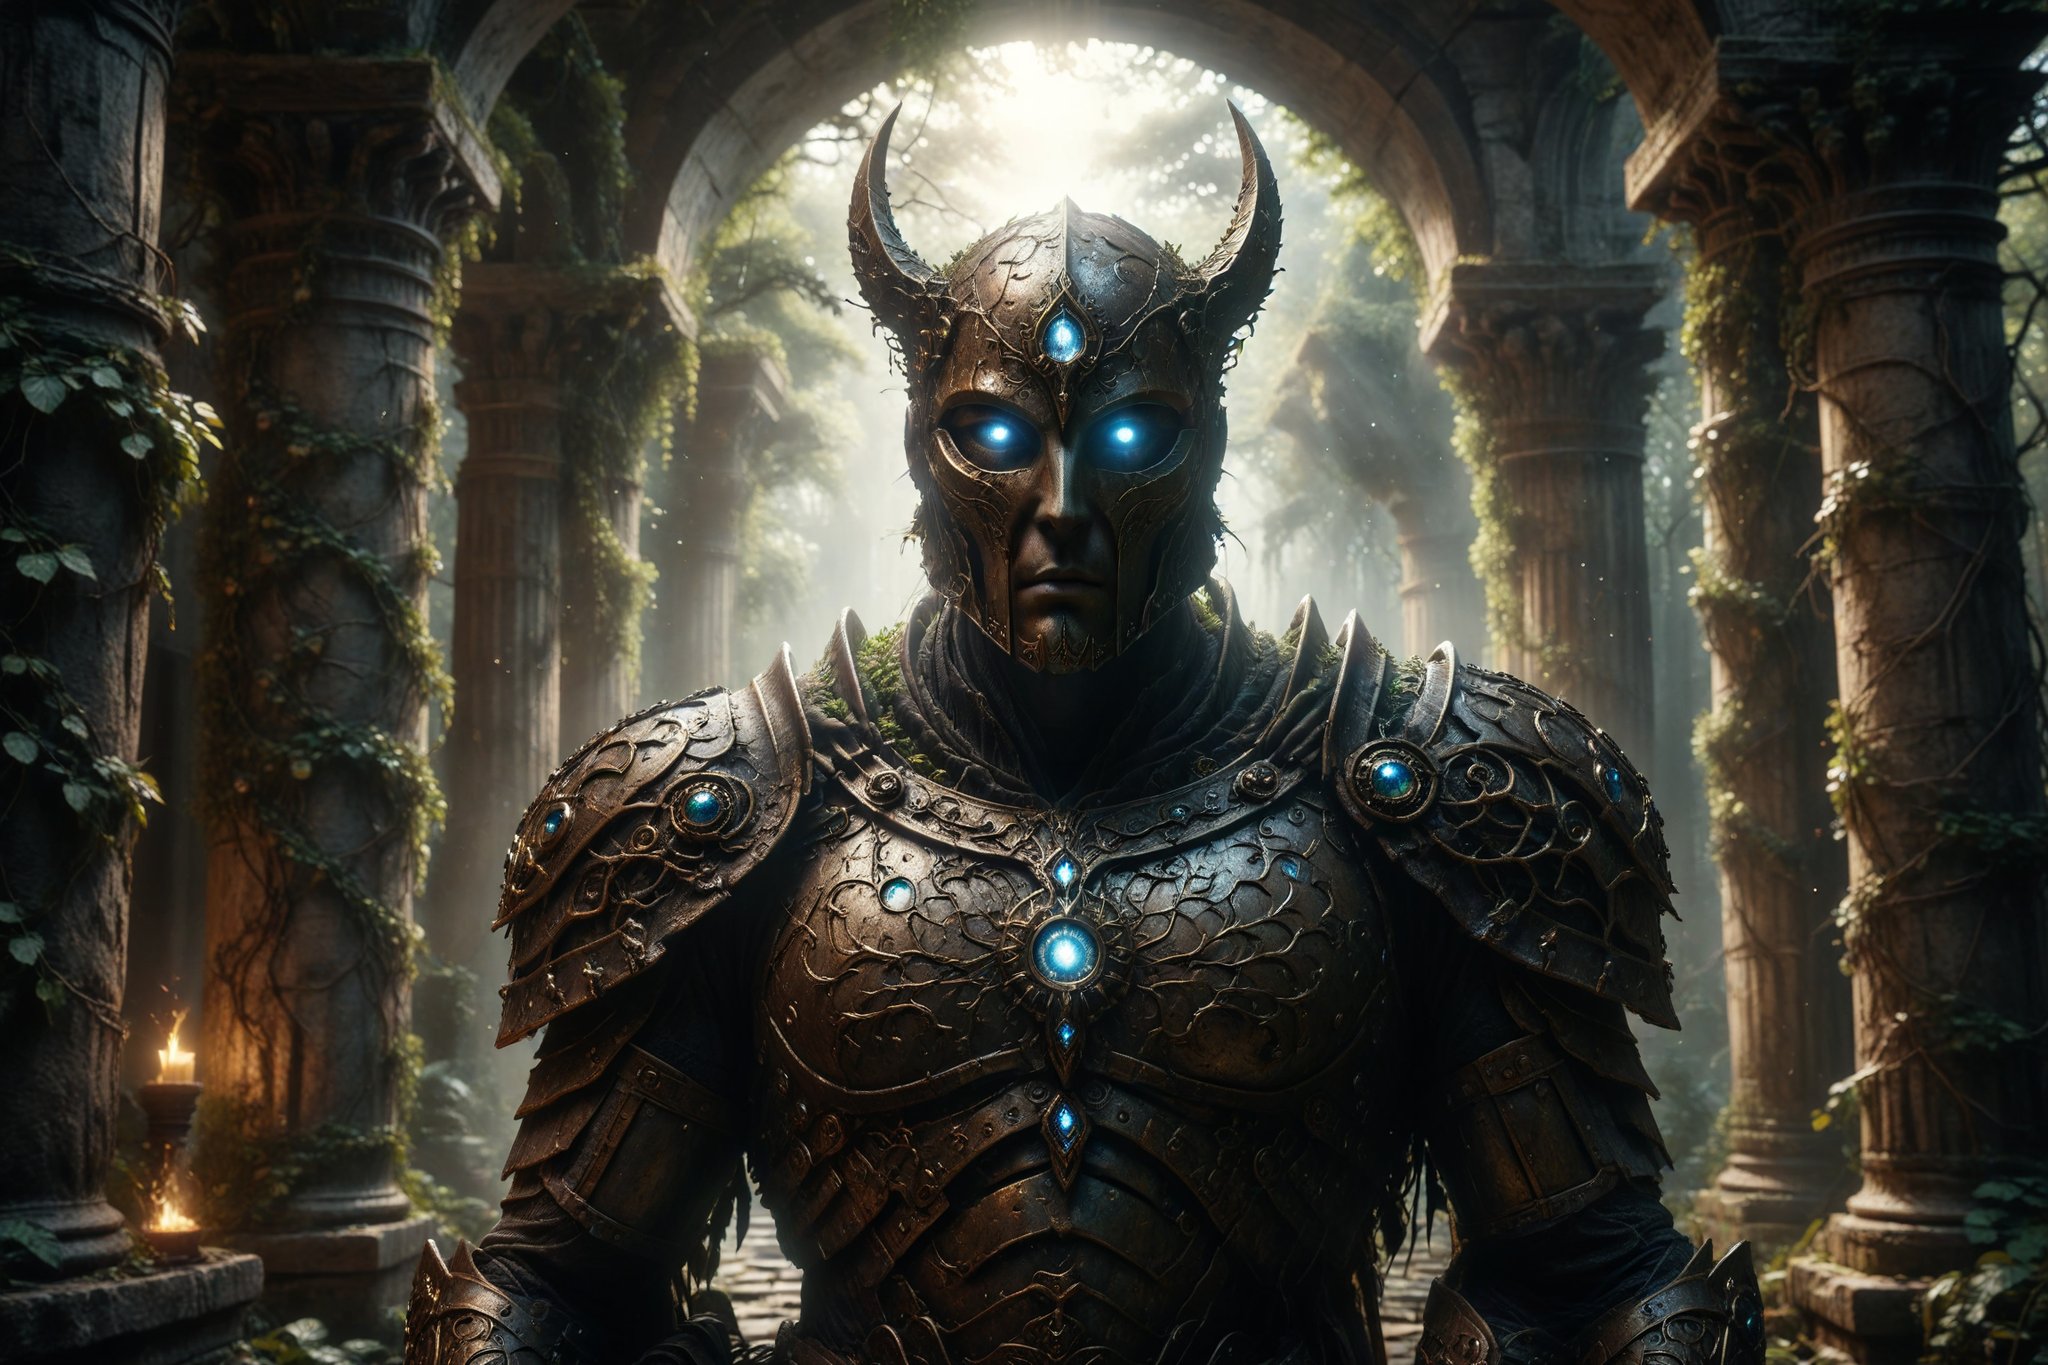 A guardian in bronze armor with eyes shining like gems, protecting a dark portal emitting flashes of light between ancient columns covered in mystical vines.